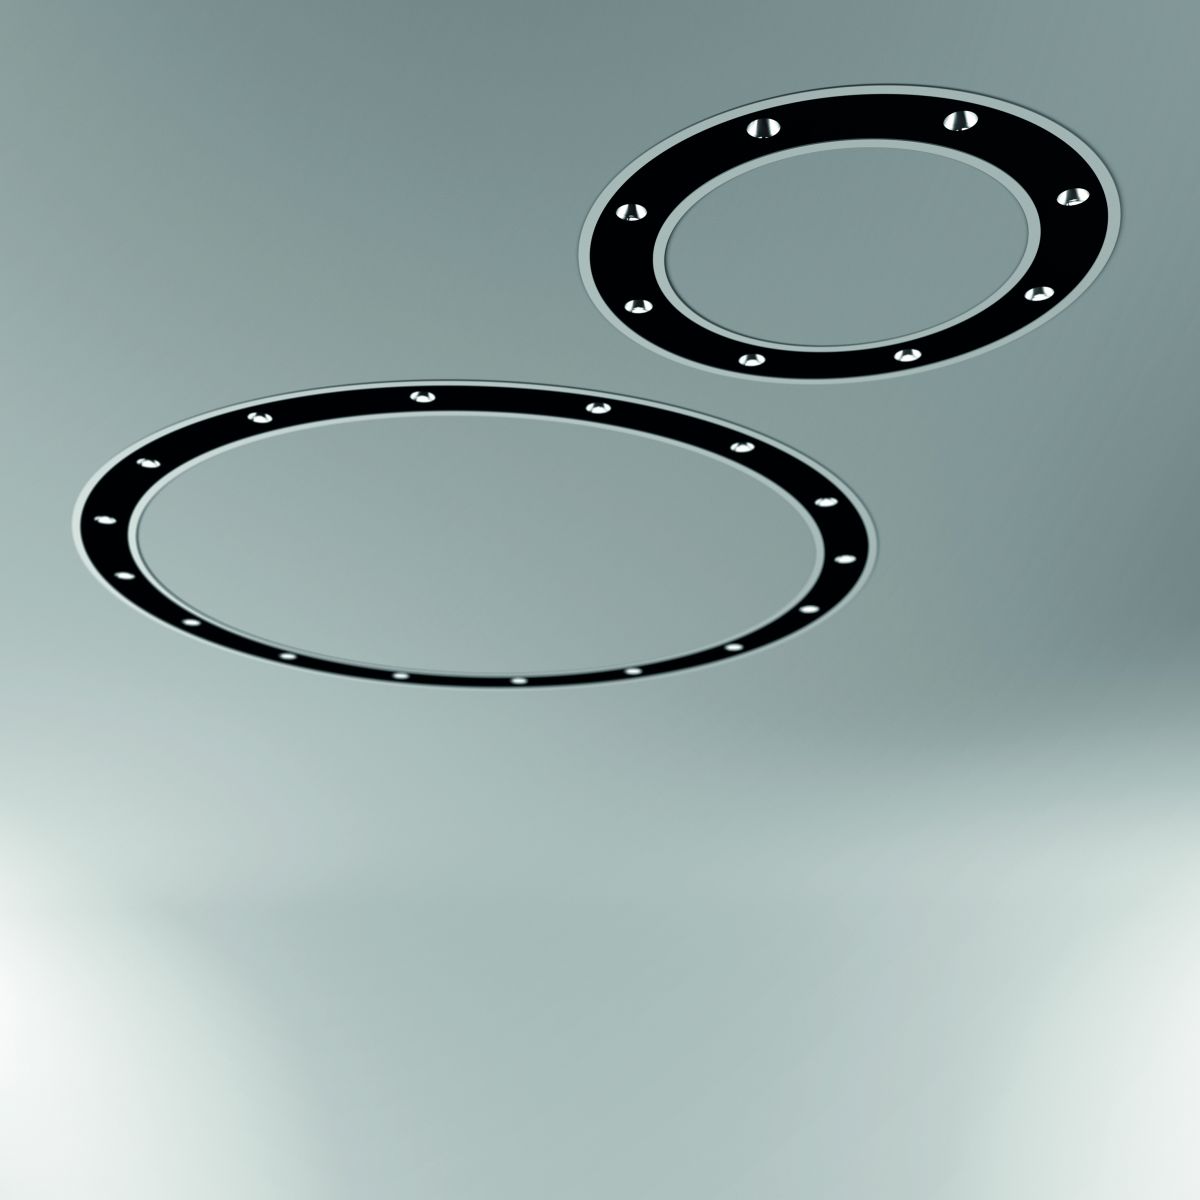 blore cup ring luminaire recessed 700mm 3000k 5461lm 8x6w dali